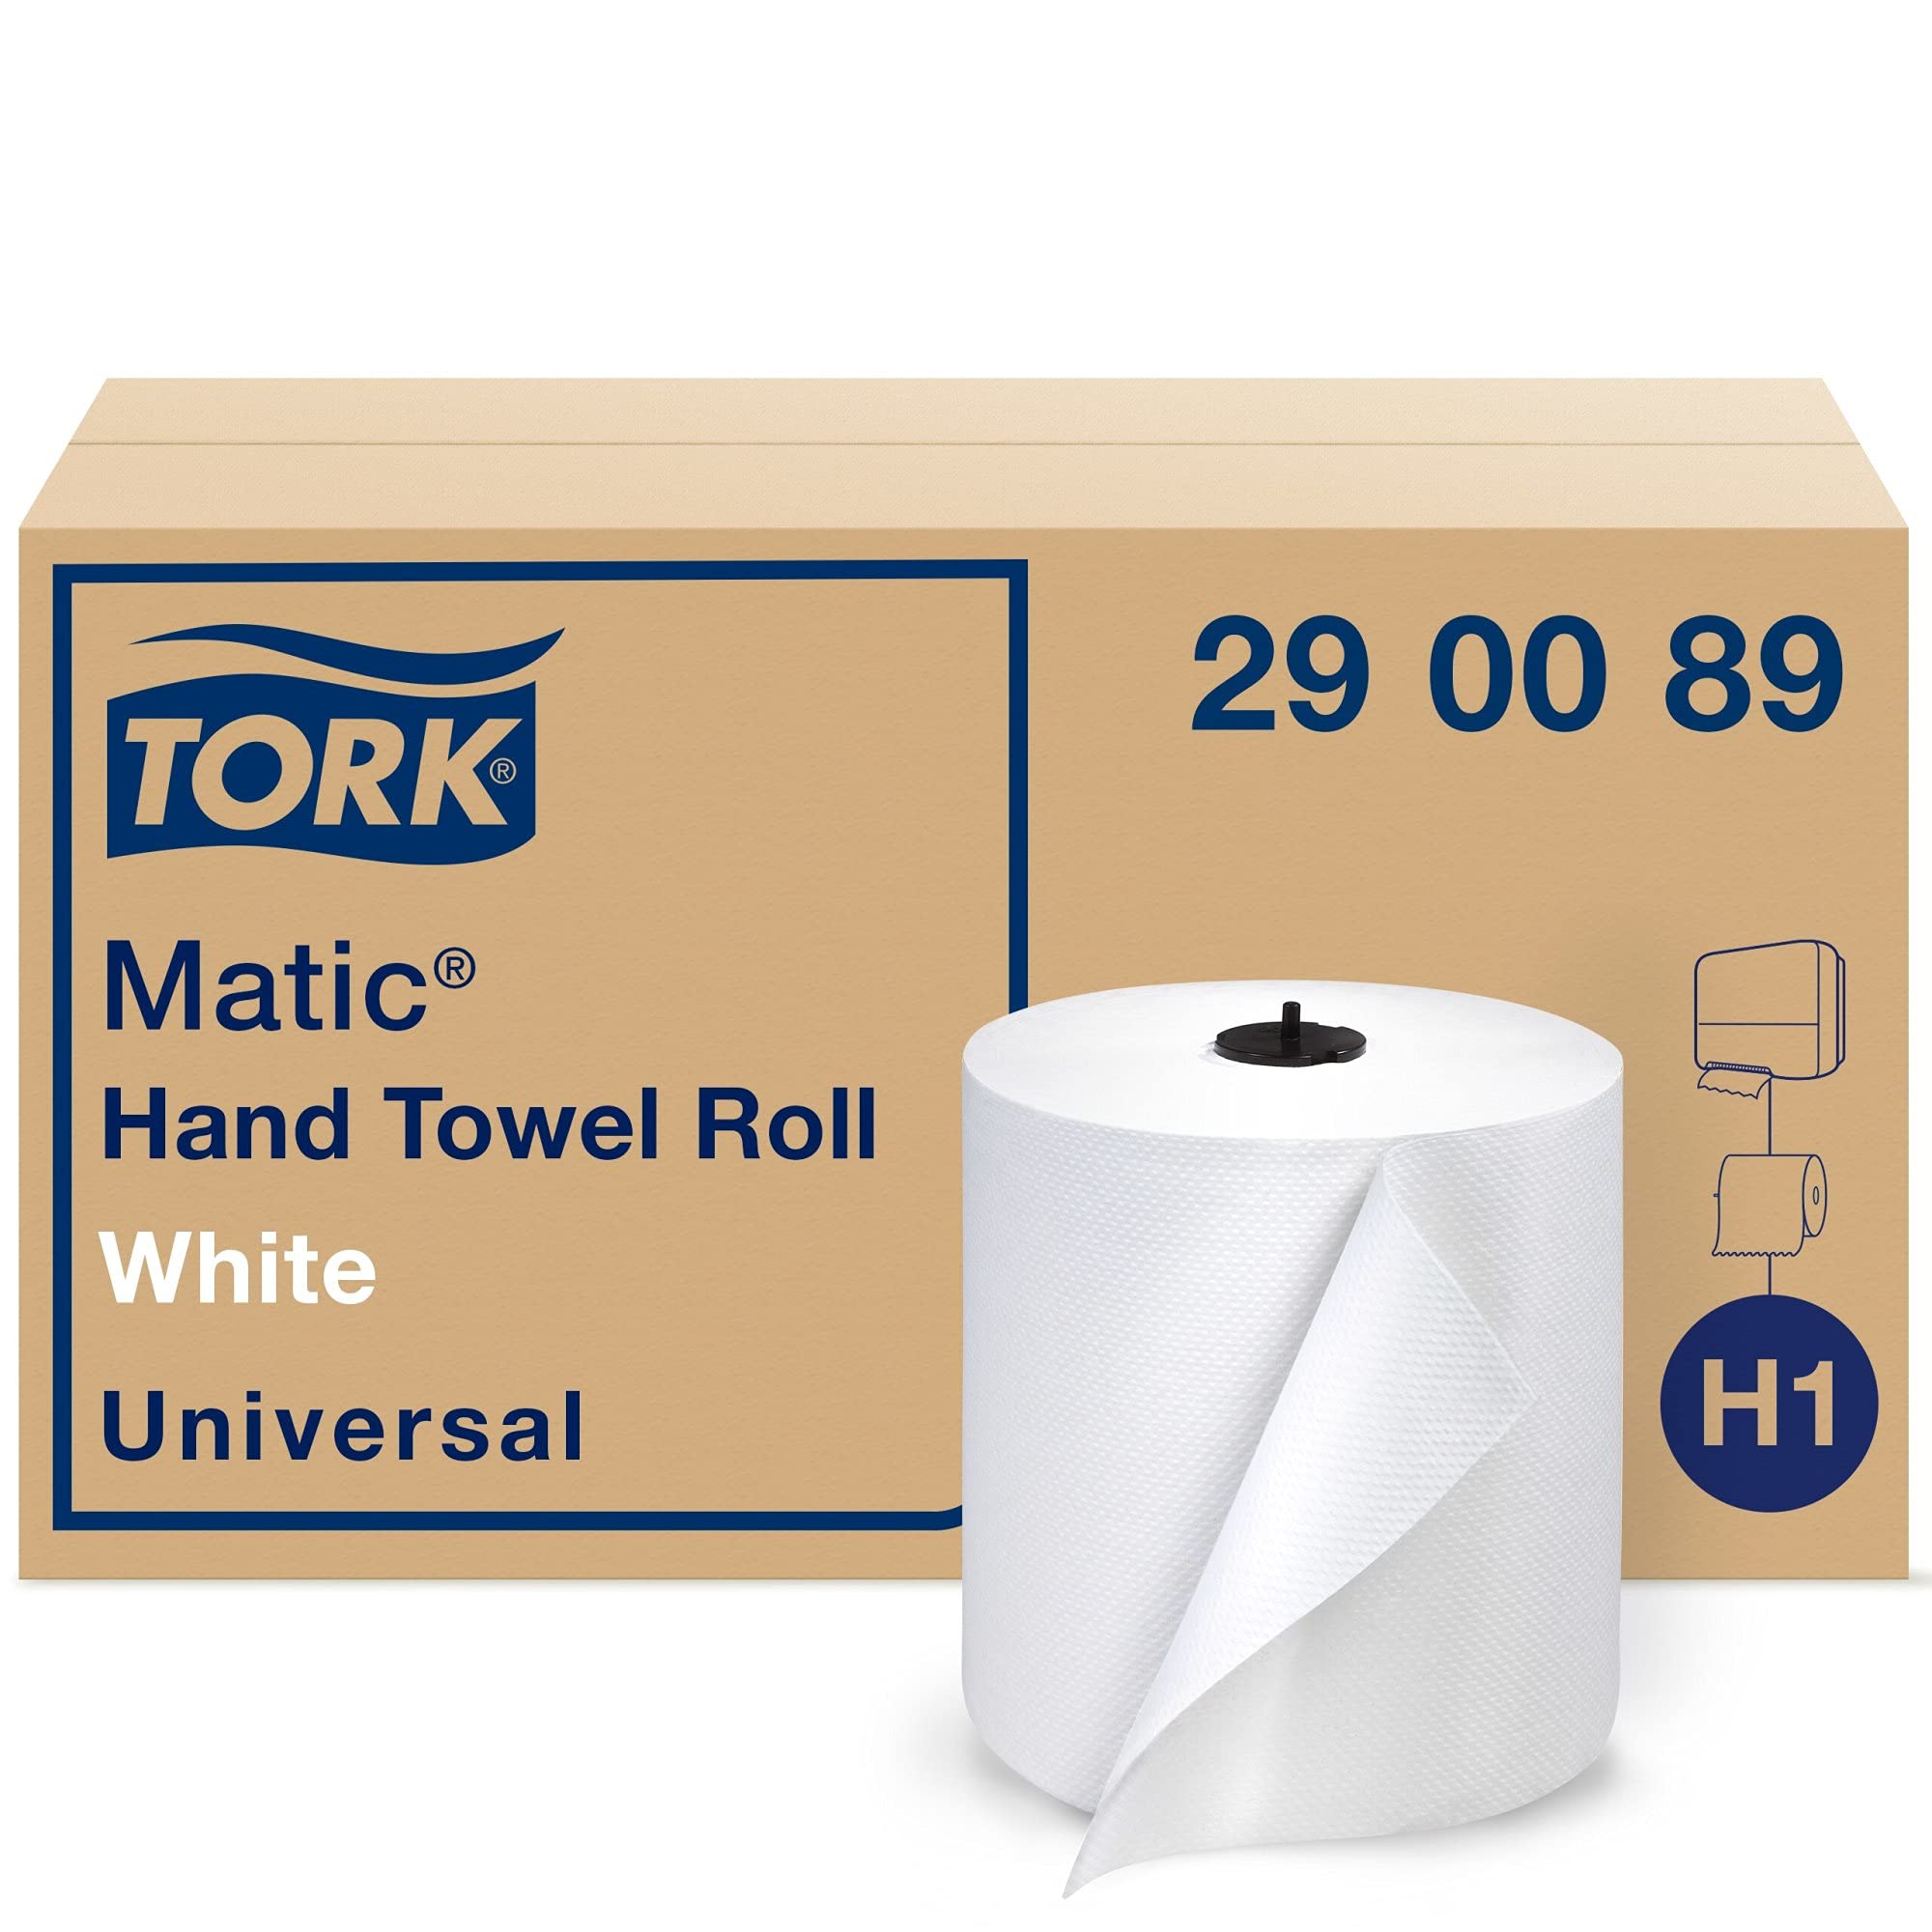 Tork Matic Paper Hand Towel Roll White H1, Universal, 1...